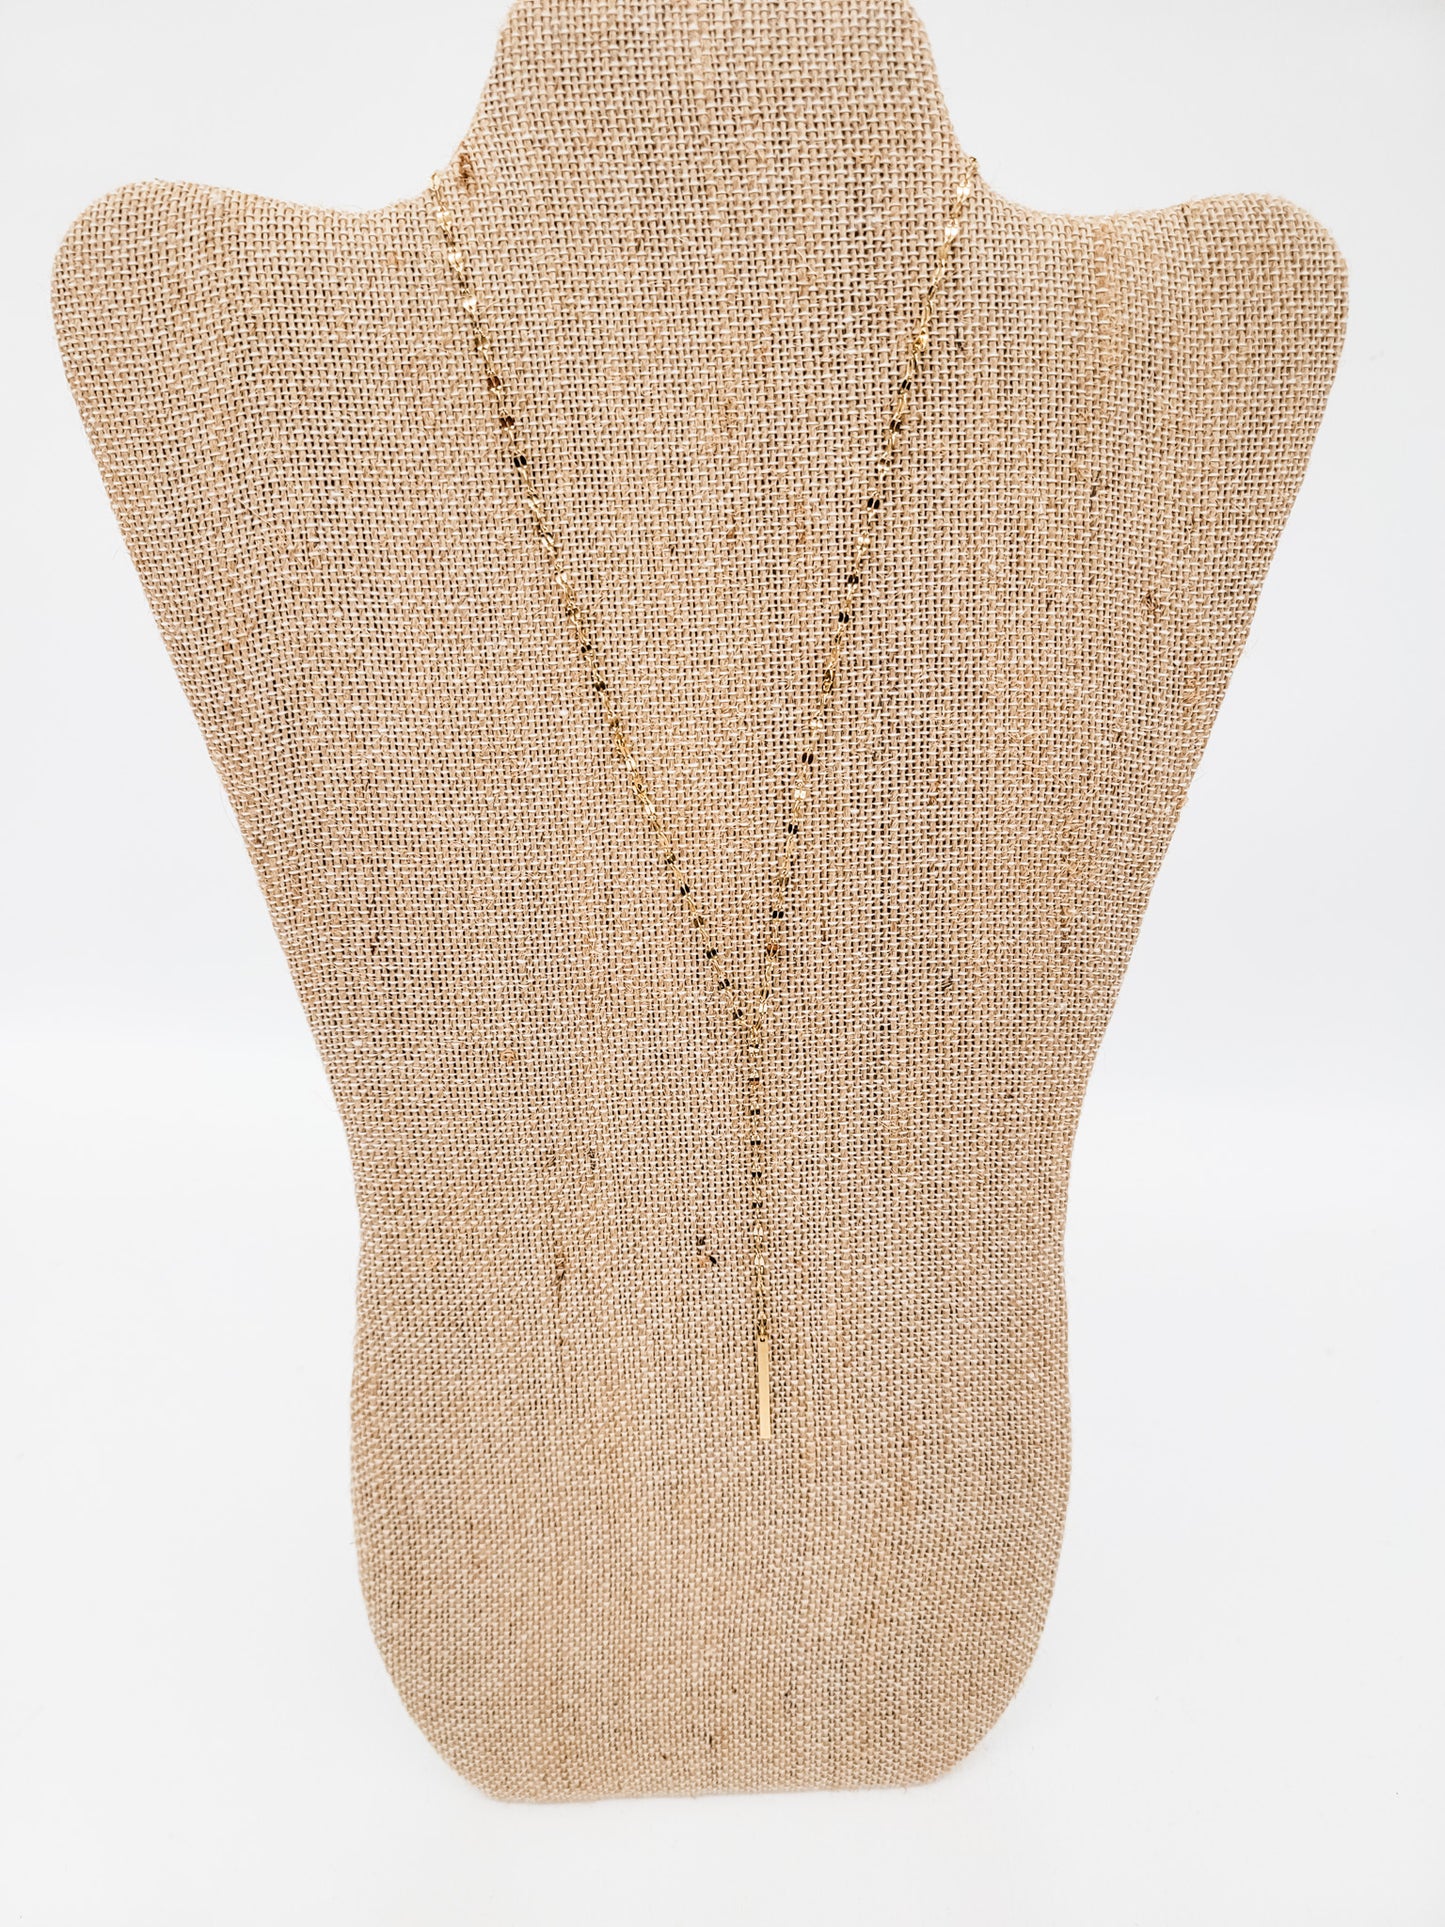 Simple, Gold Chain Necklaces - Variety